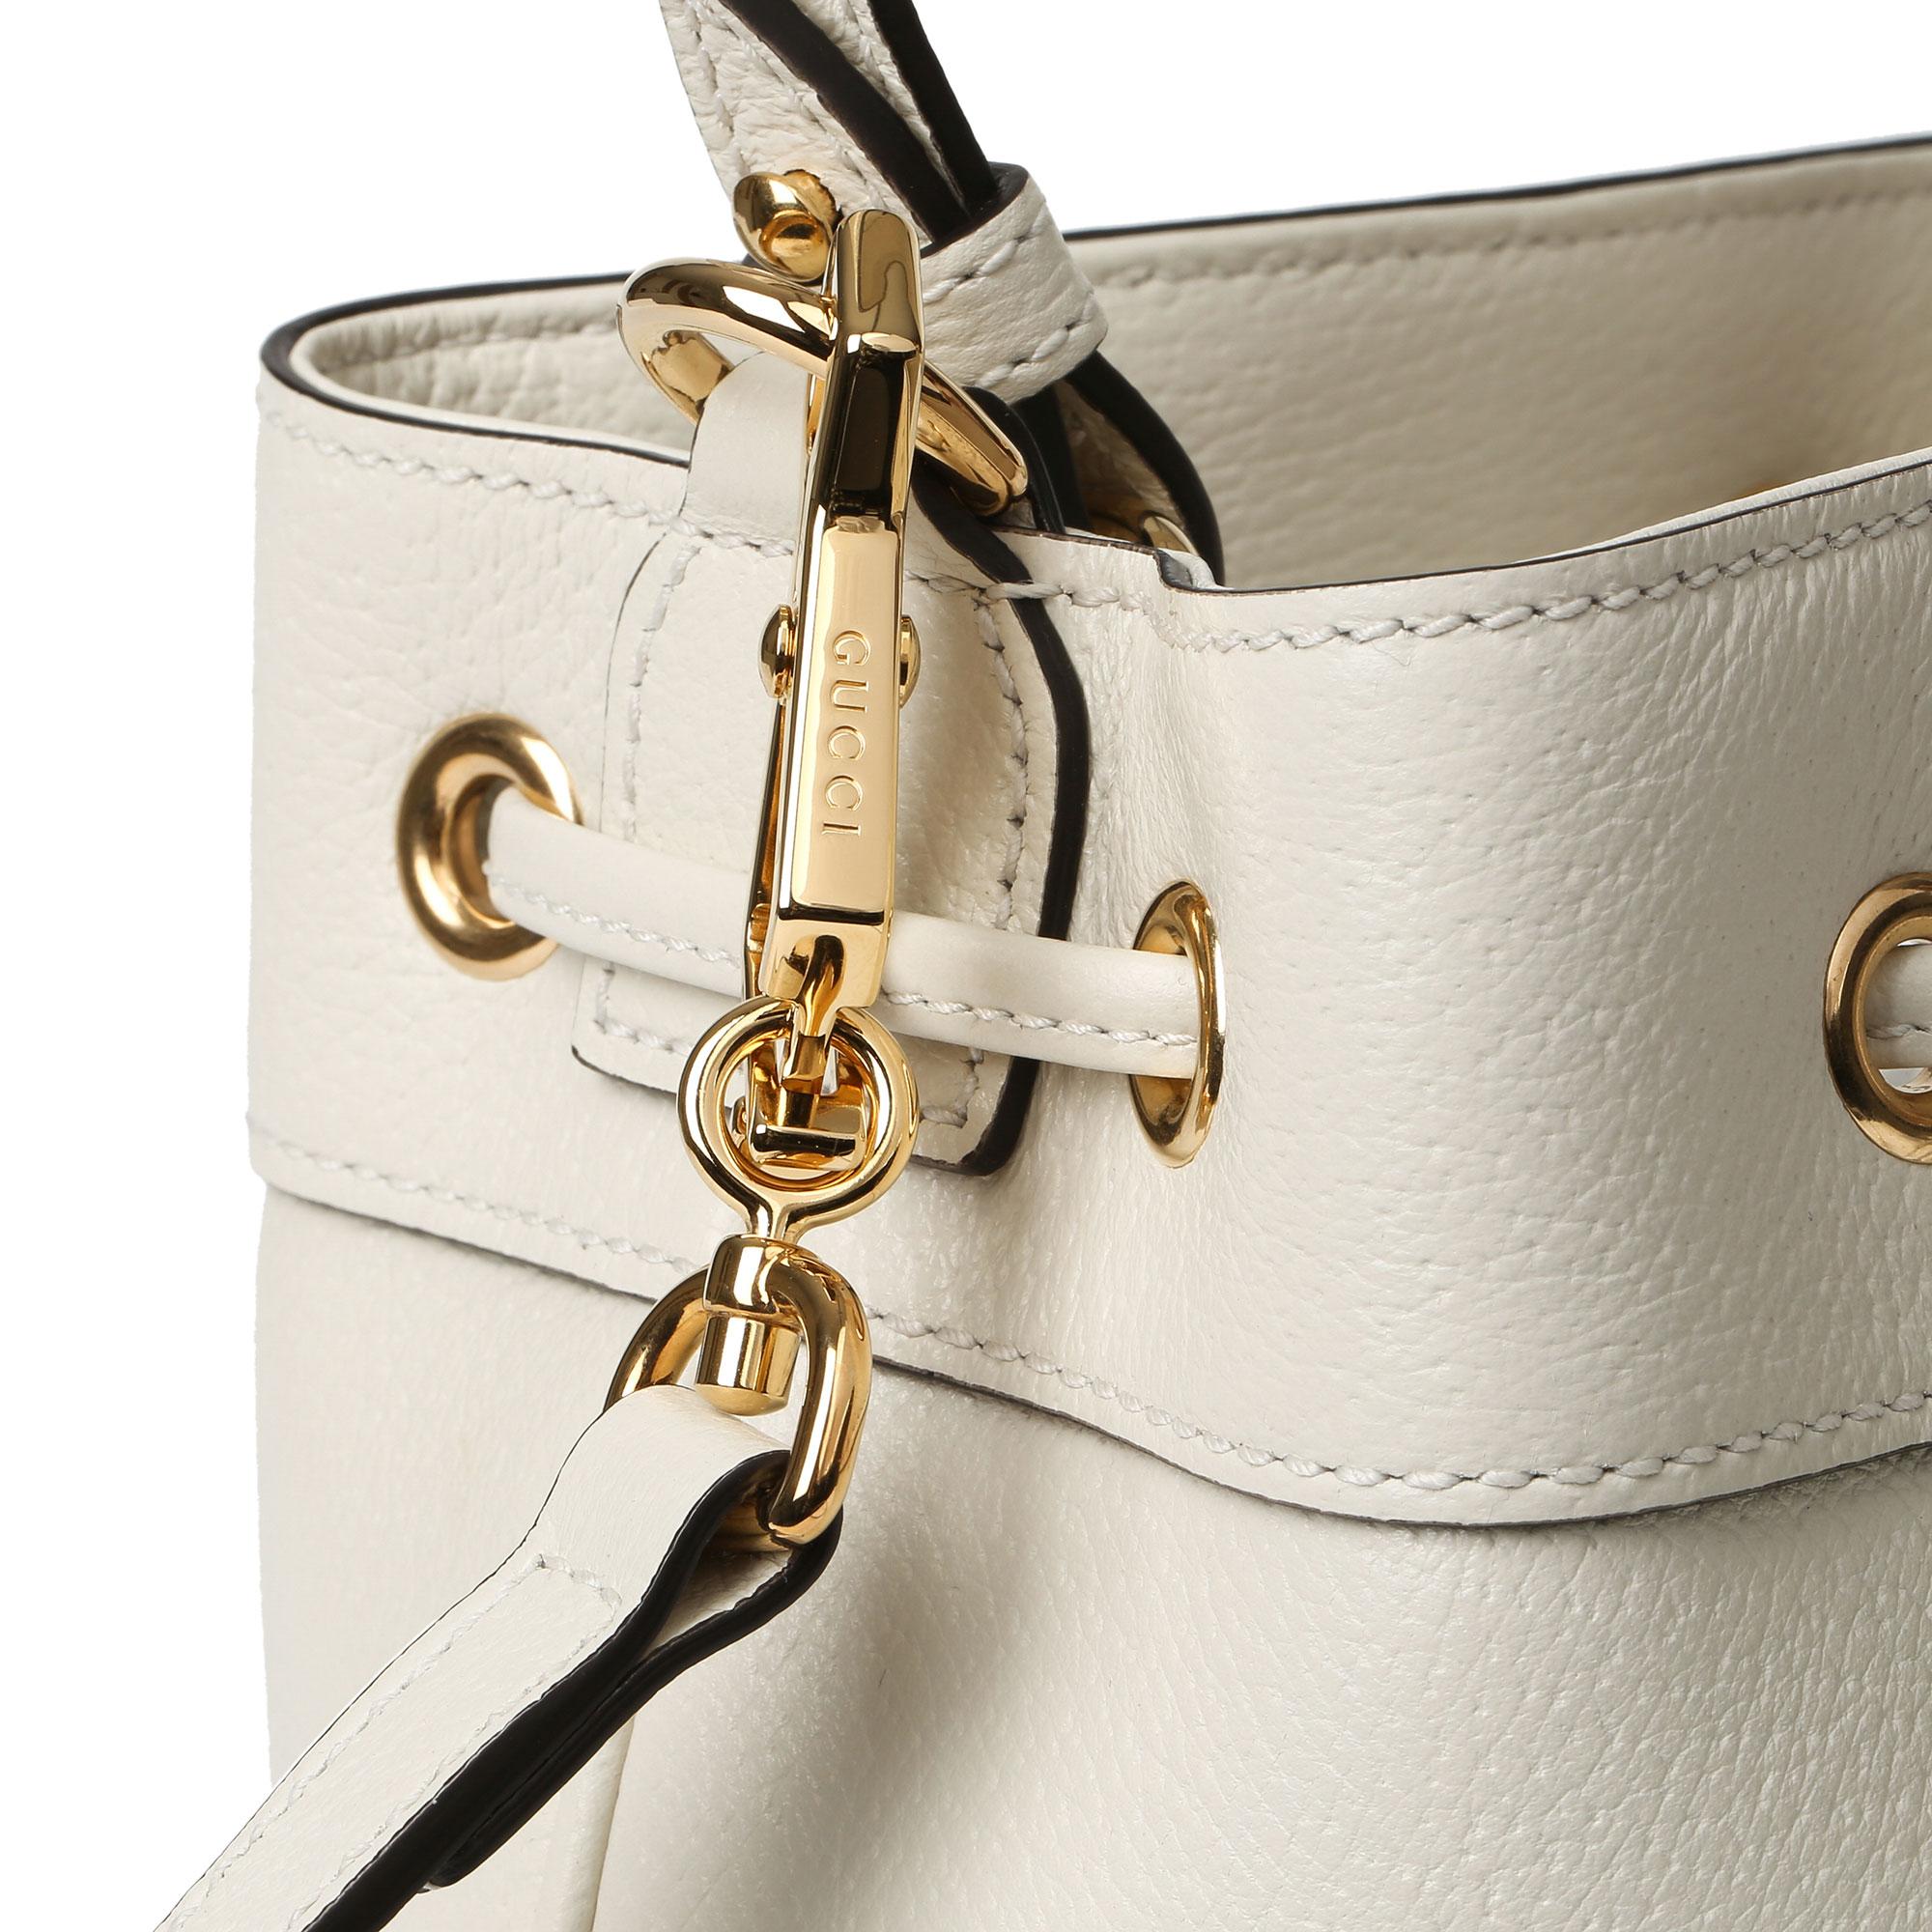 2021 Gucci White Pigskin Leather Web Orphidia Bucket Bag 2